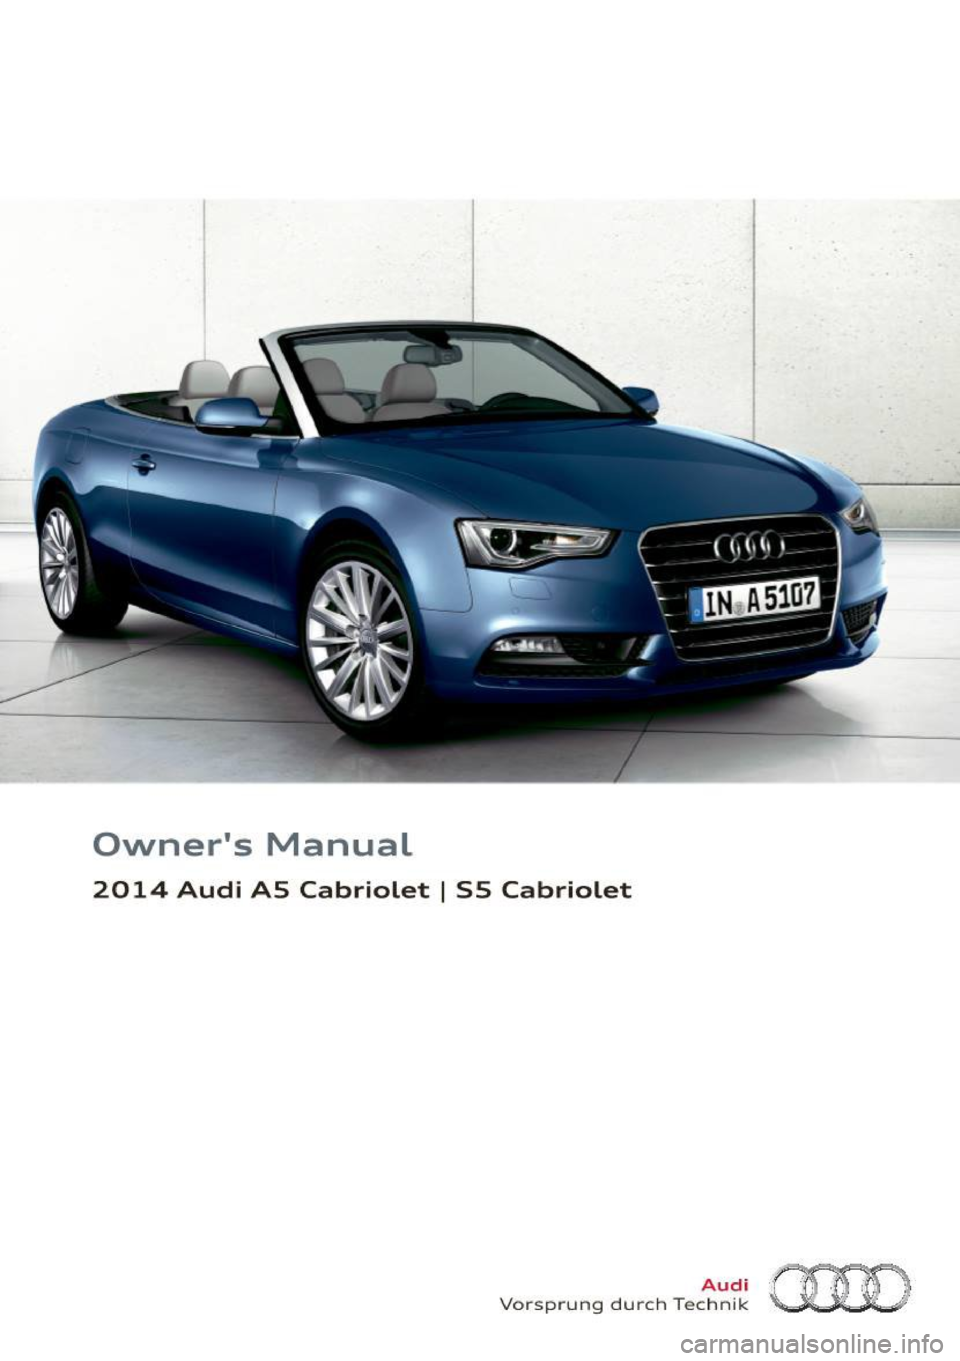 AUDI A5 CABRIOLET 2014  Owners Manual Owners  Manual 
2014  Audi  AS  Cabriolet I S5  Cabriolet 
Vorsprung  durch Tec~~1~ :ml)  